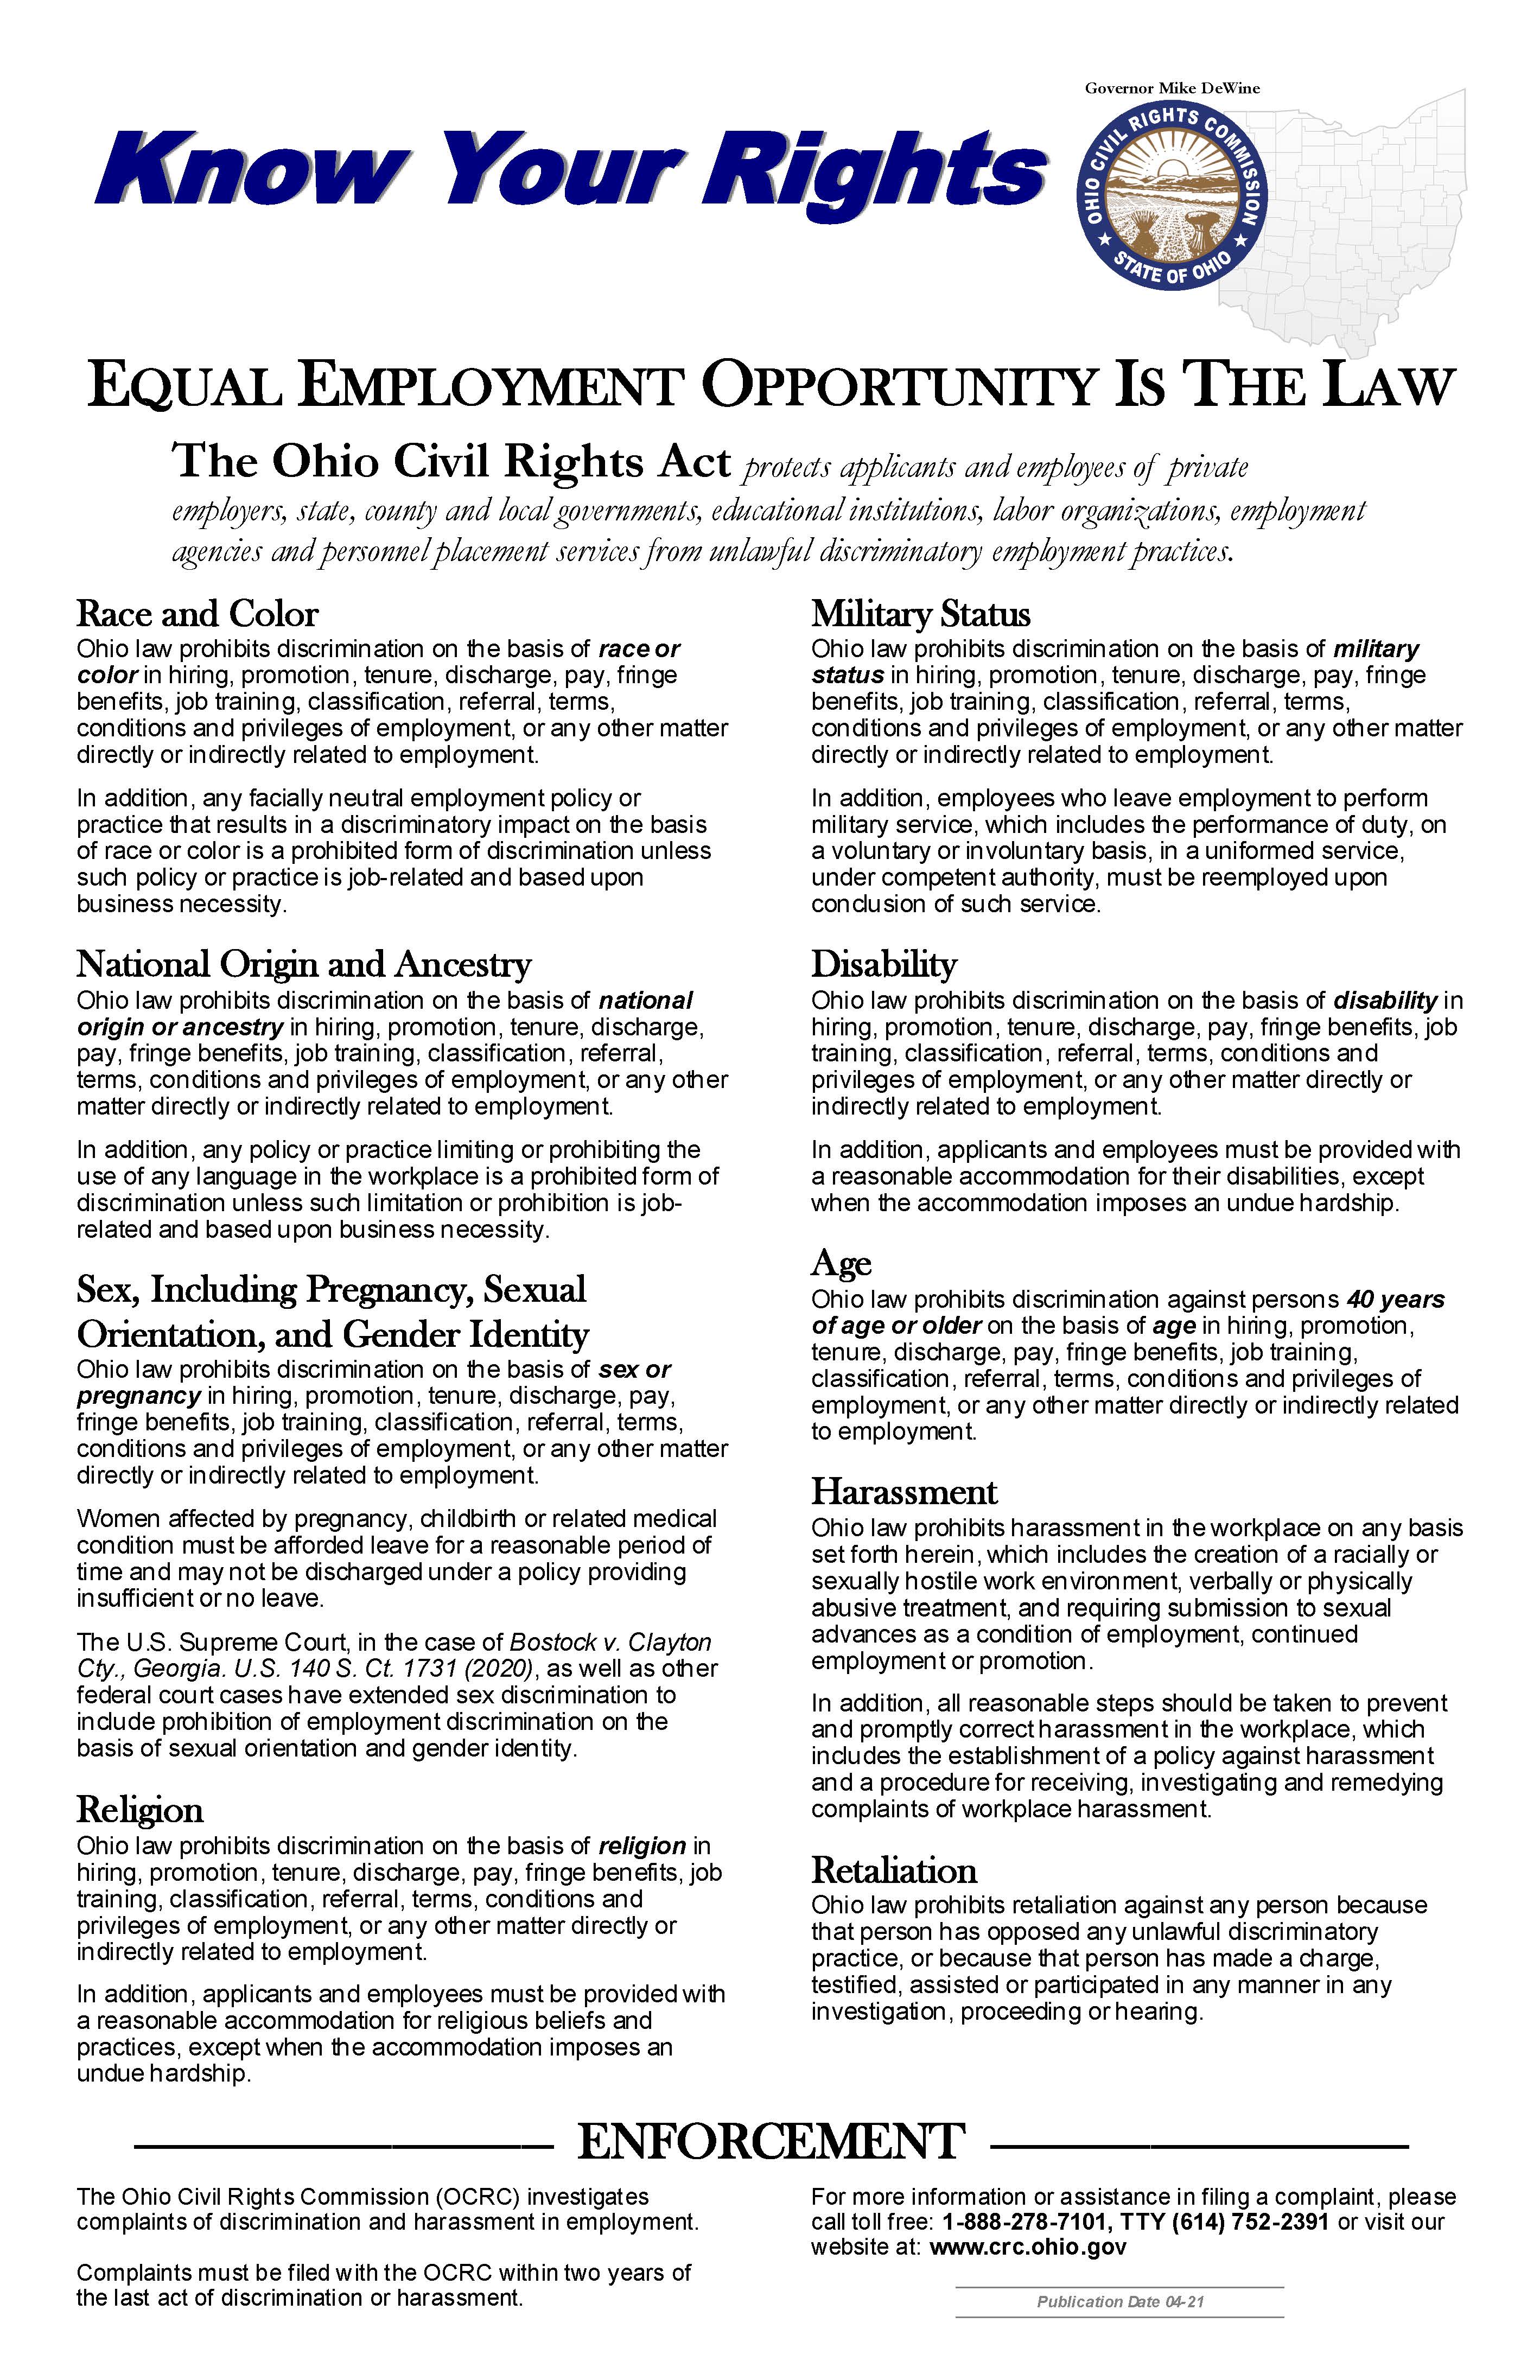 Ohio EEO Know Your Rights poste